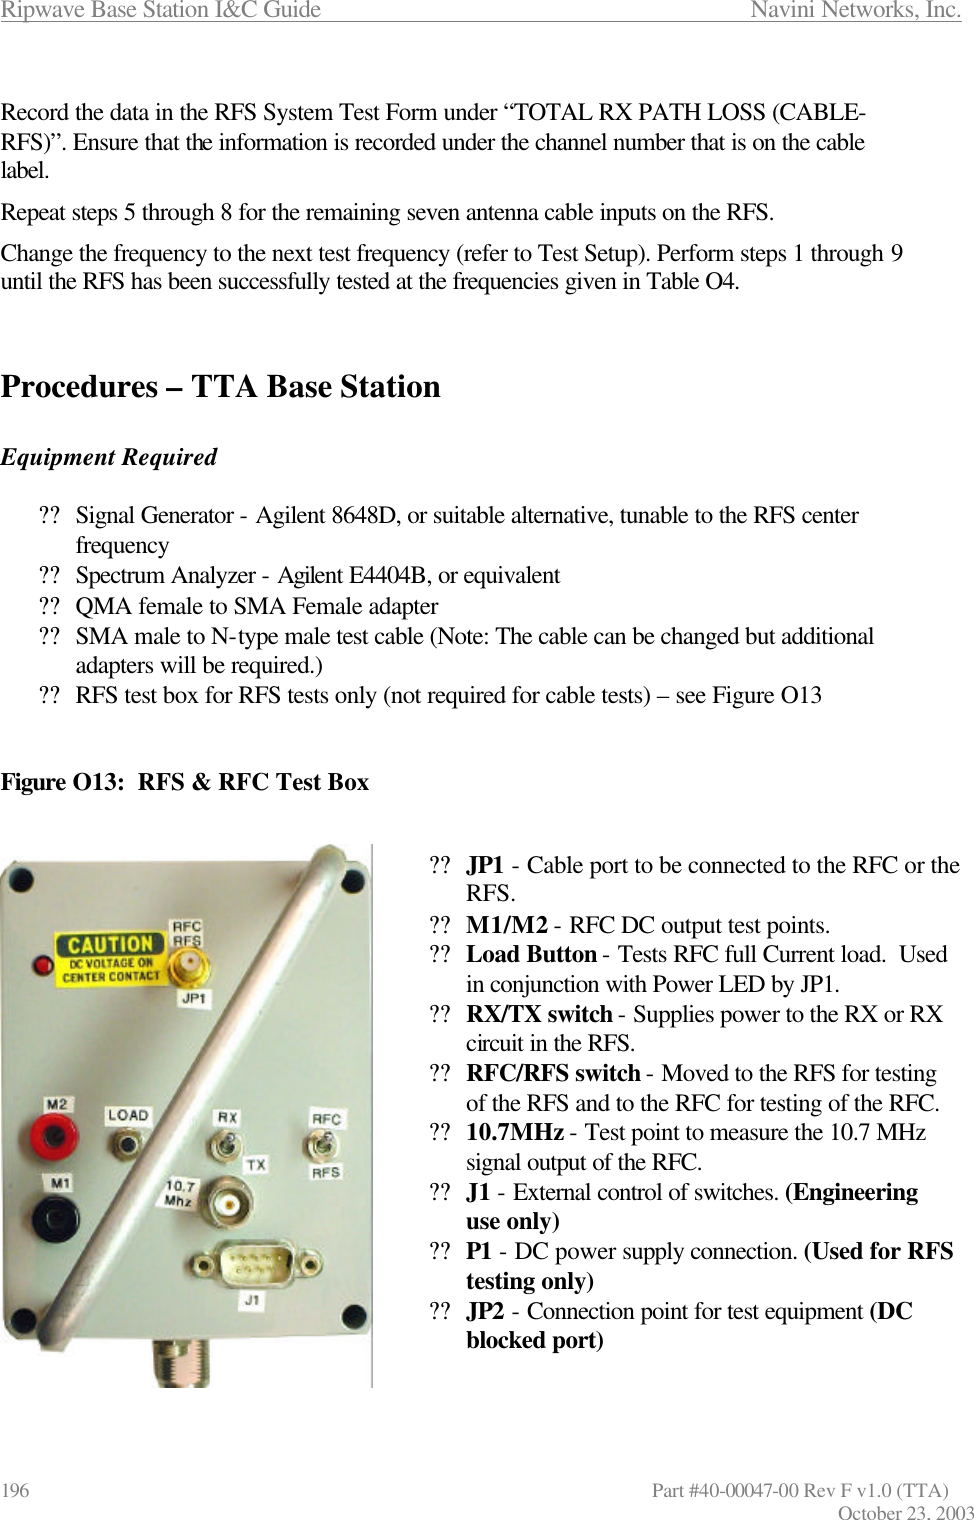 Ripwave Base Station I&amp;C Guide                      Navini Networks, Inc. 196                   Part #40-00047-00 Rev F v1.0 (TTA) October 23, 2003  Record the data in the RFS System Test Form under “TOTAL RX PATH LOSS (CABLE-RFS)”. Ensure that the information is recorded under the channel number that is on the cable label. Repeat steps 5 through 8 for the remaining seven antenna cable inputs on the RFS. Change the frequency to the next test frequency (refer to Test Setup). Perform steps 1 through 9 until the RFS has been successfully tested at the frequencies given in Table O4.   Procedures – TTA Base Station   Equipment Required  ?? Signal Generator - Agilent 8648D, or suitable alternative, tunable to the RFS center frequency ?? Spectrum Analyzer - Agilent E4404B, or equivalent ?? QMA female to SMA Female adapter ?? SMA male to N-type male test cable (Note: The cable can be changed but additional adapters will be required.) ?? RFS test box for RFS tests only (not required for cable tests) – see Figure O13   Figure O13:  RFS &amp; RFC Test Box   ?? JP1 - Cable port to be connected to the RFC or the RFS. ?? M1/M2 - RFC DC output test points. ?? Load Button - Tests RFC full Current load.  Used in conjunction with Power LED by JP1. ?? RX/TX switch - Supplies power to the RX or RX circuit in the RFS. ?? RFC/RFS switch - Moved to the RFS for testing of the RFS and to the RFC for testing of the RFC. ?? 10.7MHz - Test point to measure the 10.7 MHz signal output of the RFC. ?? J1 - External control of switches. (Engineering use only) ?? P1 - DC power supply connection. (Used for RFS testing only) ?? JP2 - Connection point for test equipment (DC blocked port)   